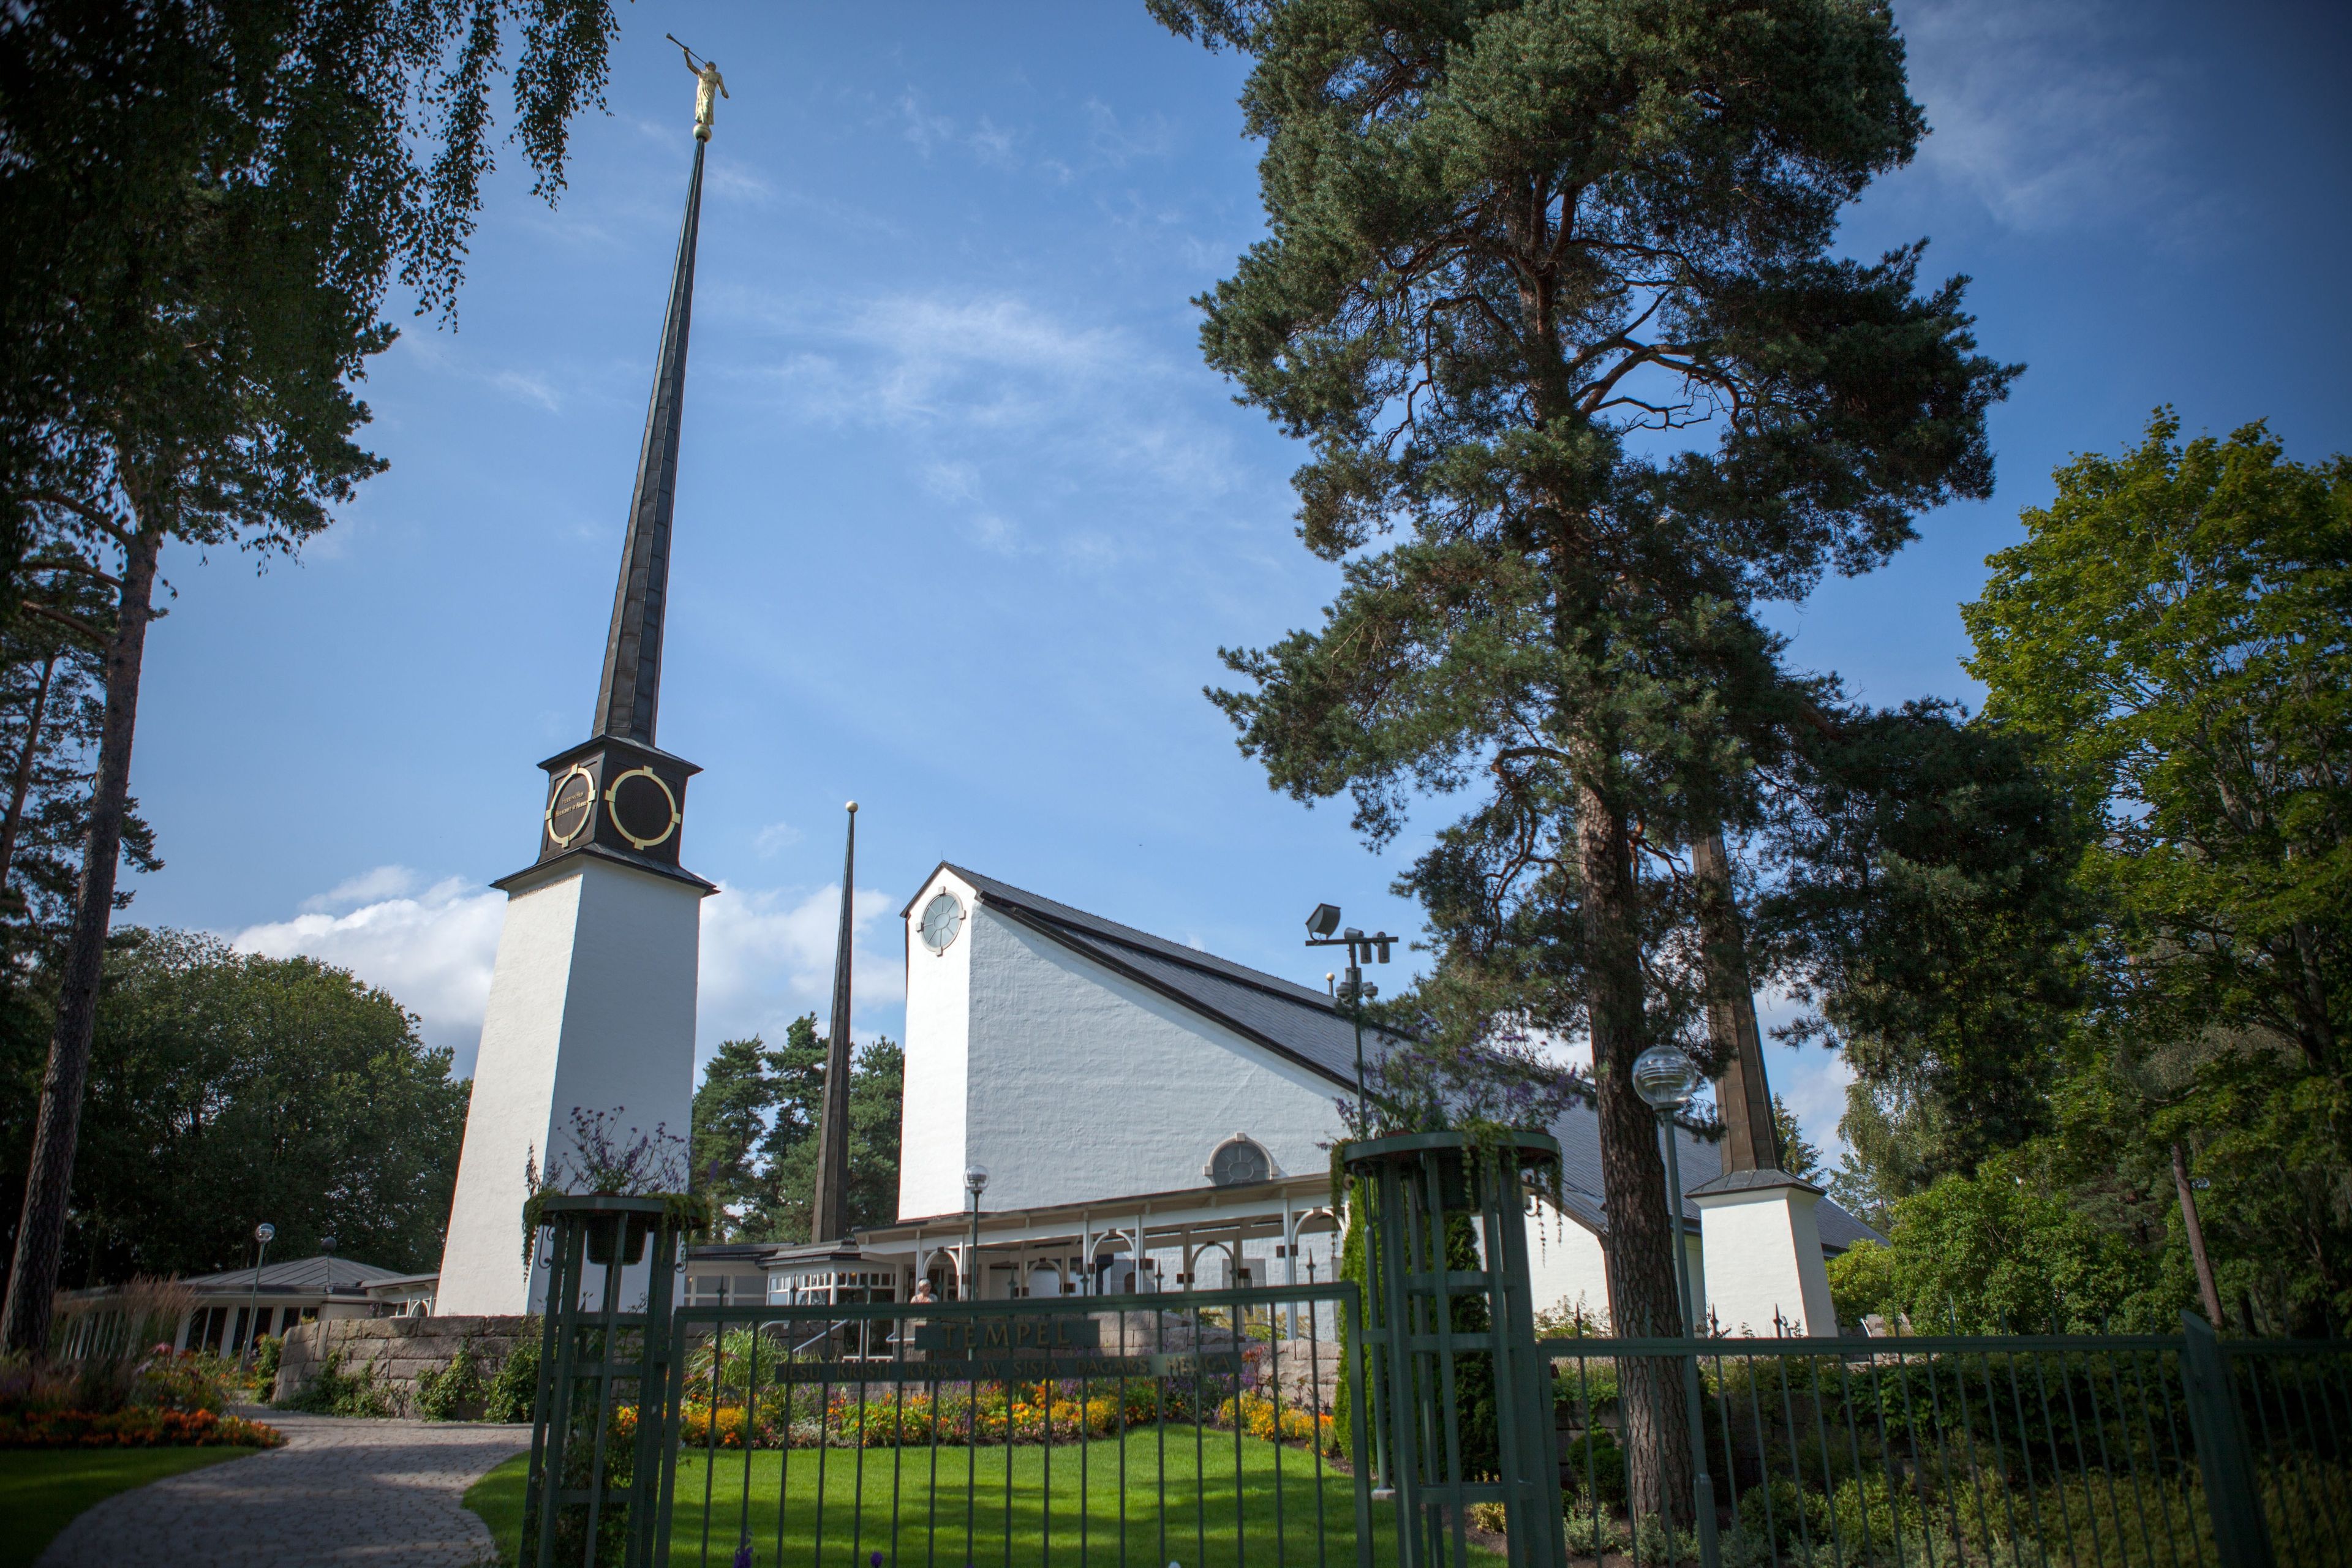 The Stockholm Sweden Temple spires, including the entrance and scenery.